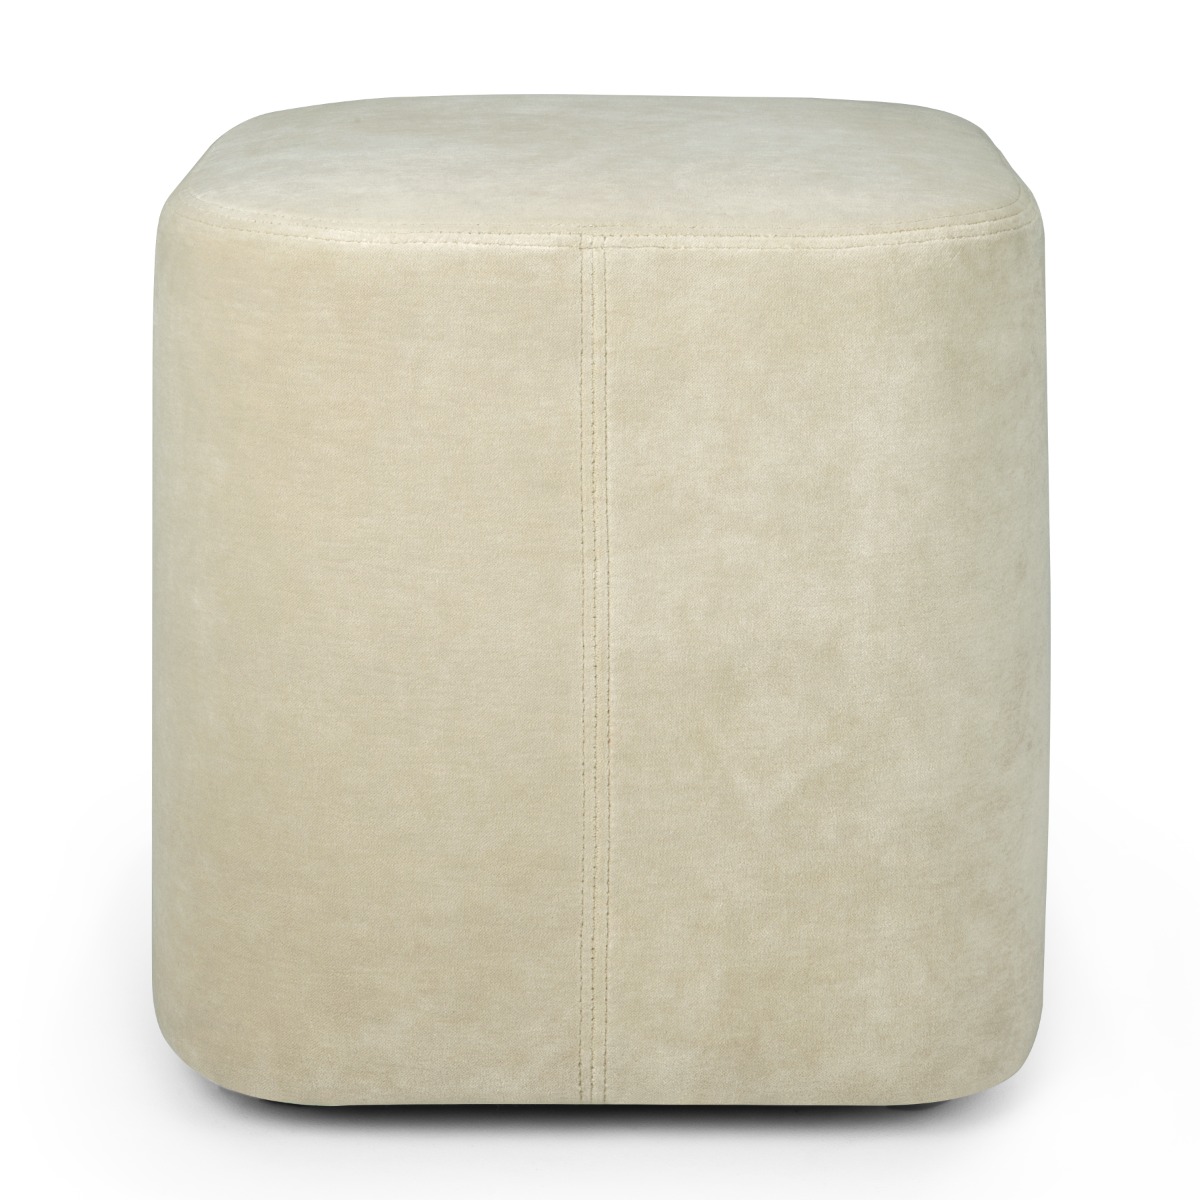 Cube Footstool in Sand